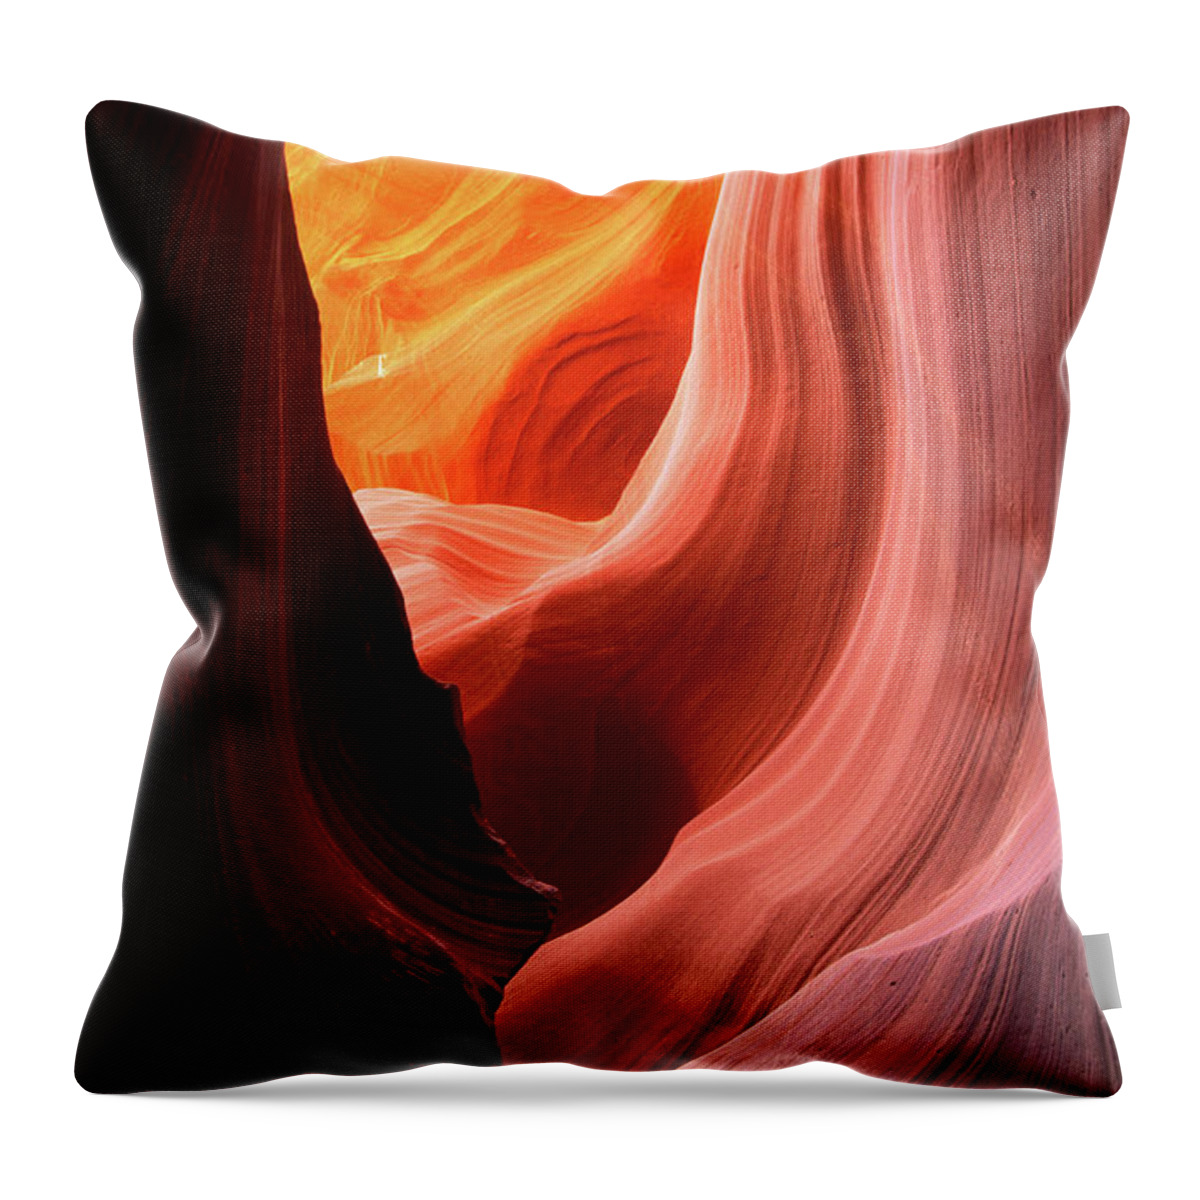 America Throw Pillow featuring the photograph Antelope Drapes by Inge Johnsson